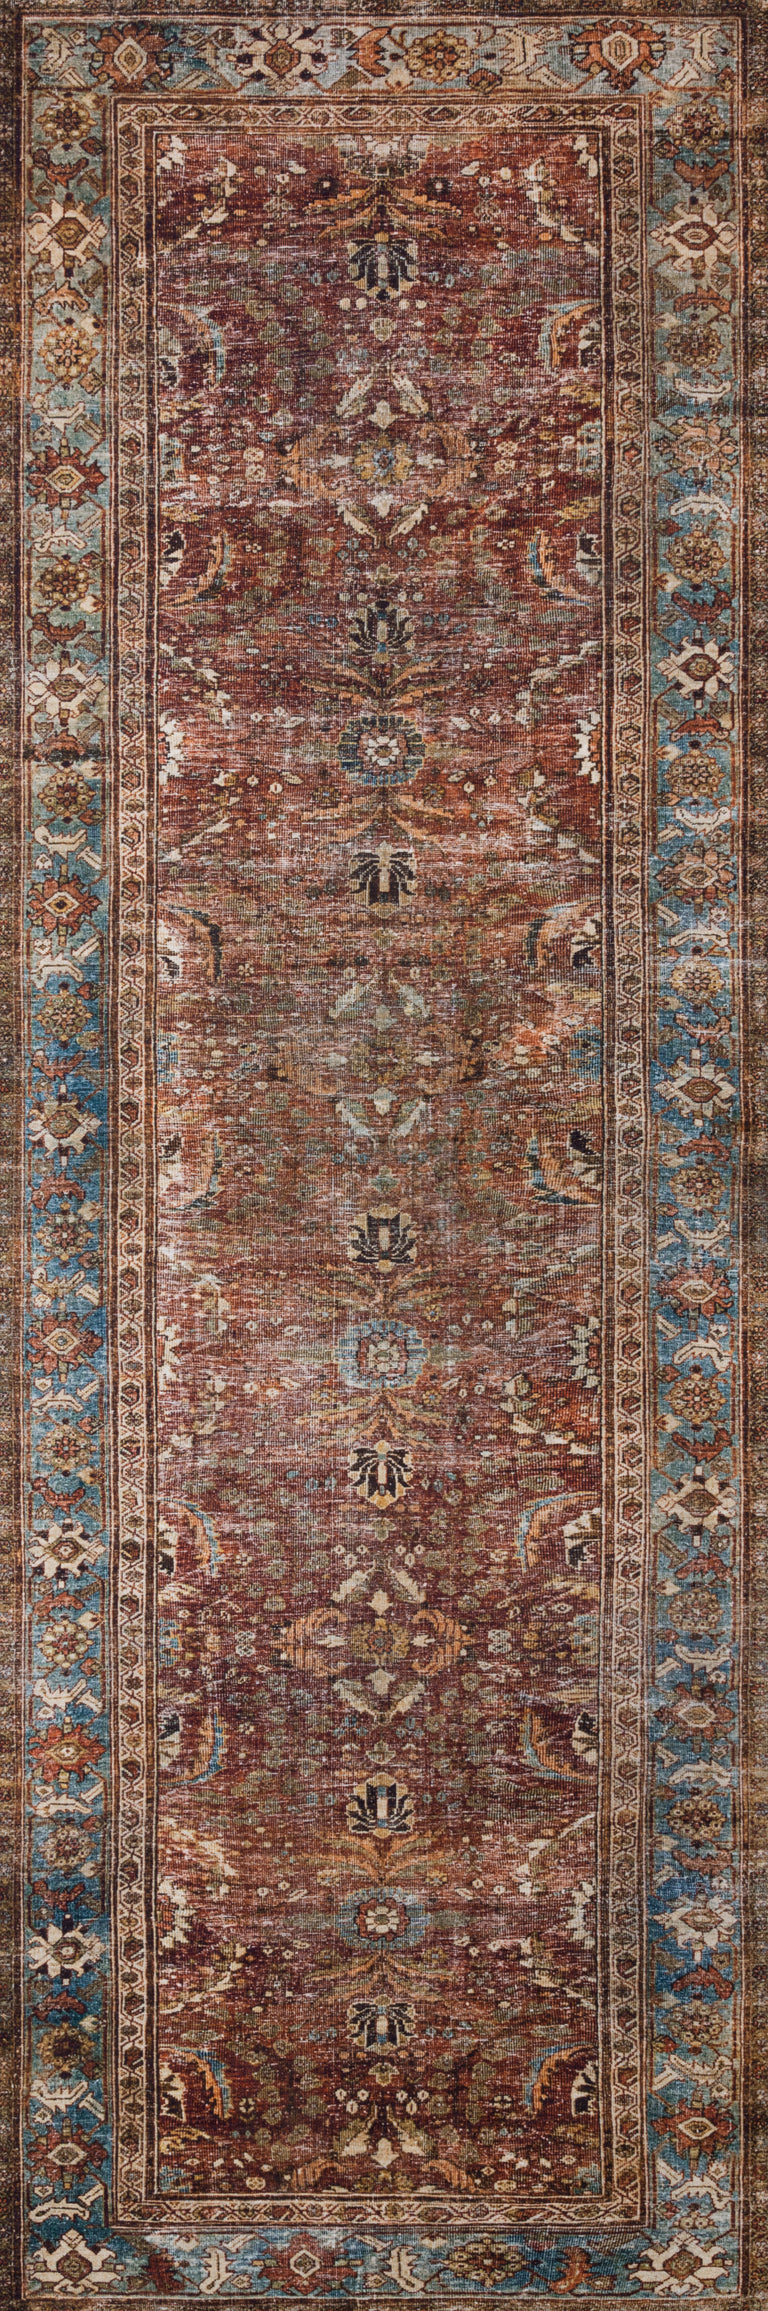 Loloi II Layla Collection Rug in Brick, Blue - 2'6" x 12'0"